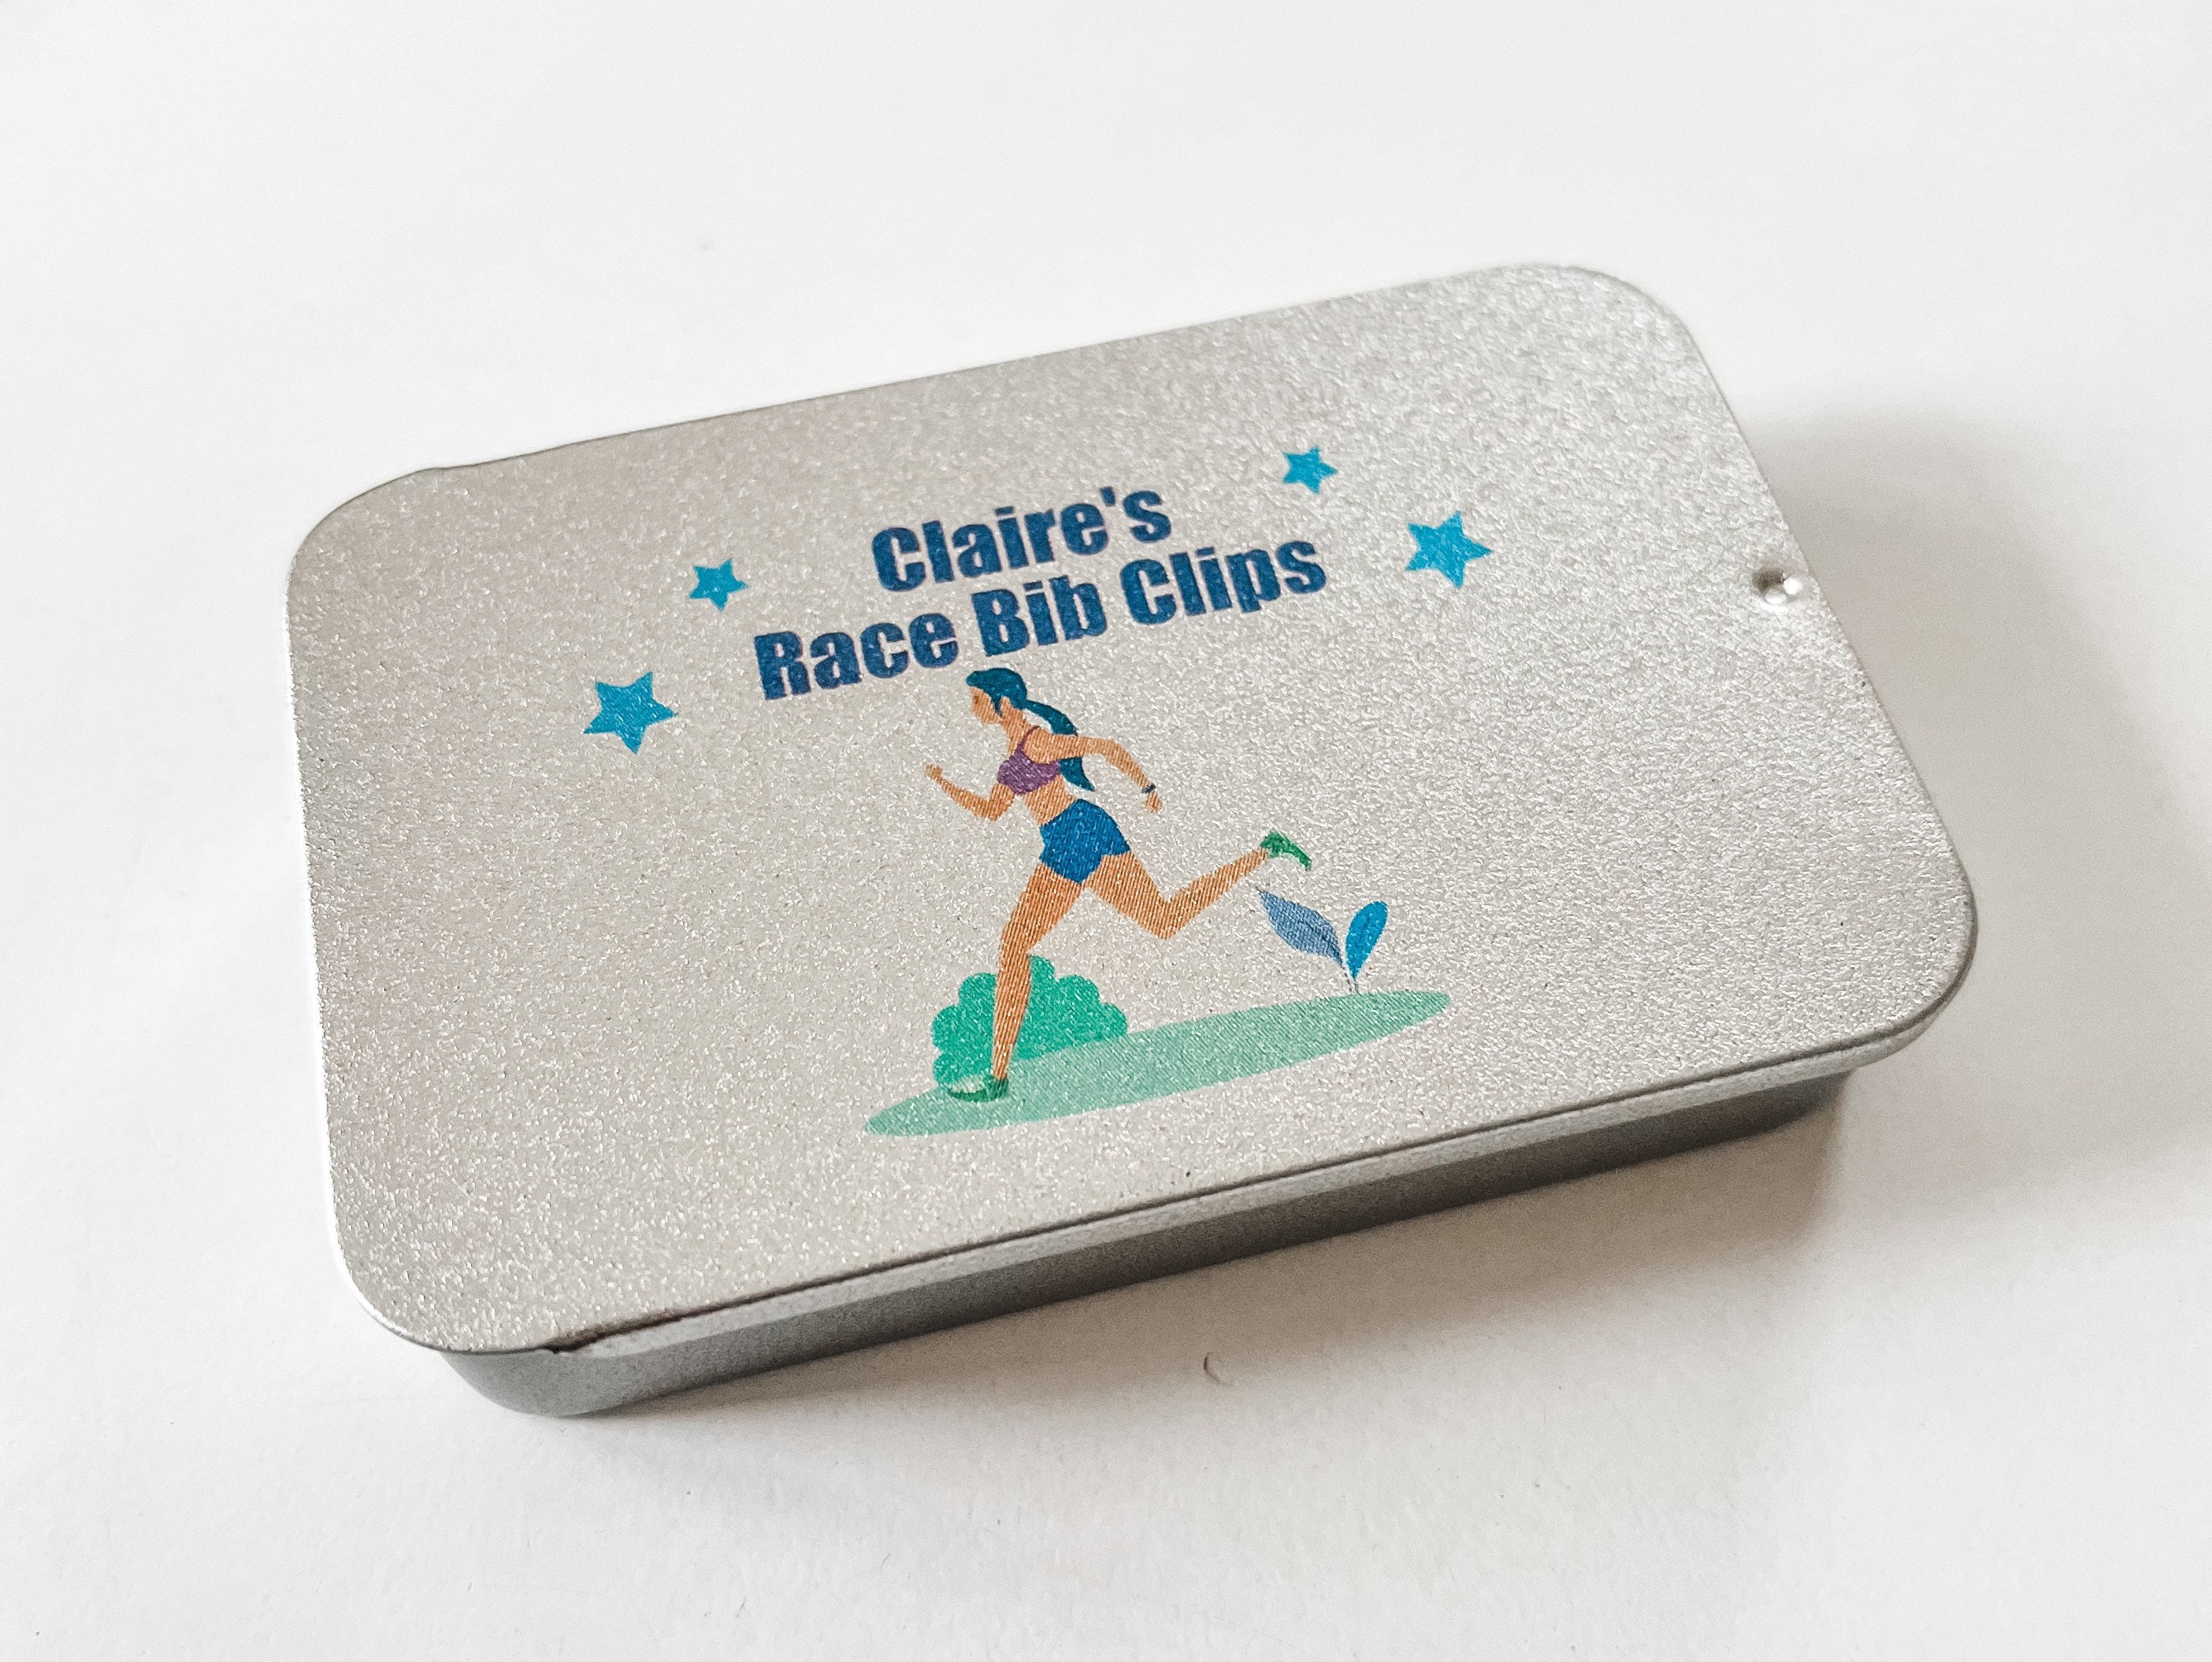 Personalised Running Bib Clip Tin Holder Gift Idea for Male Runners Pocket  Sized for Keeping Safety Pins or Bib Clips In 